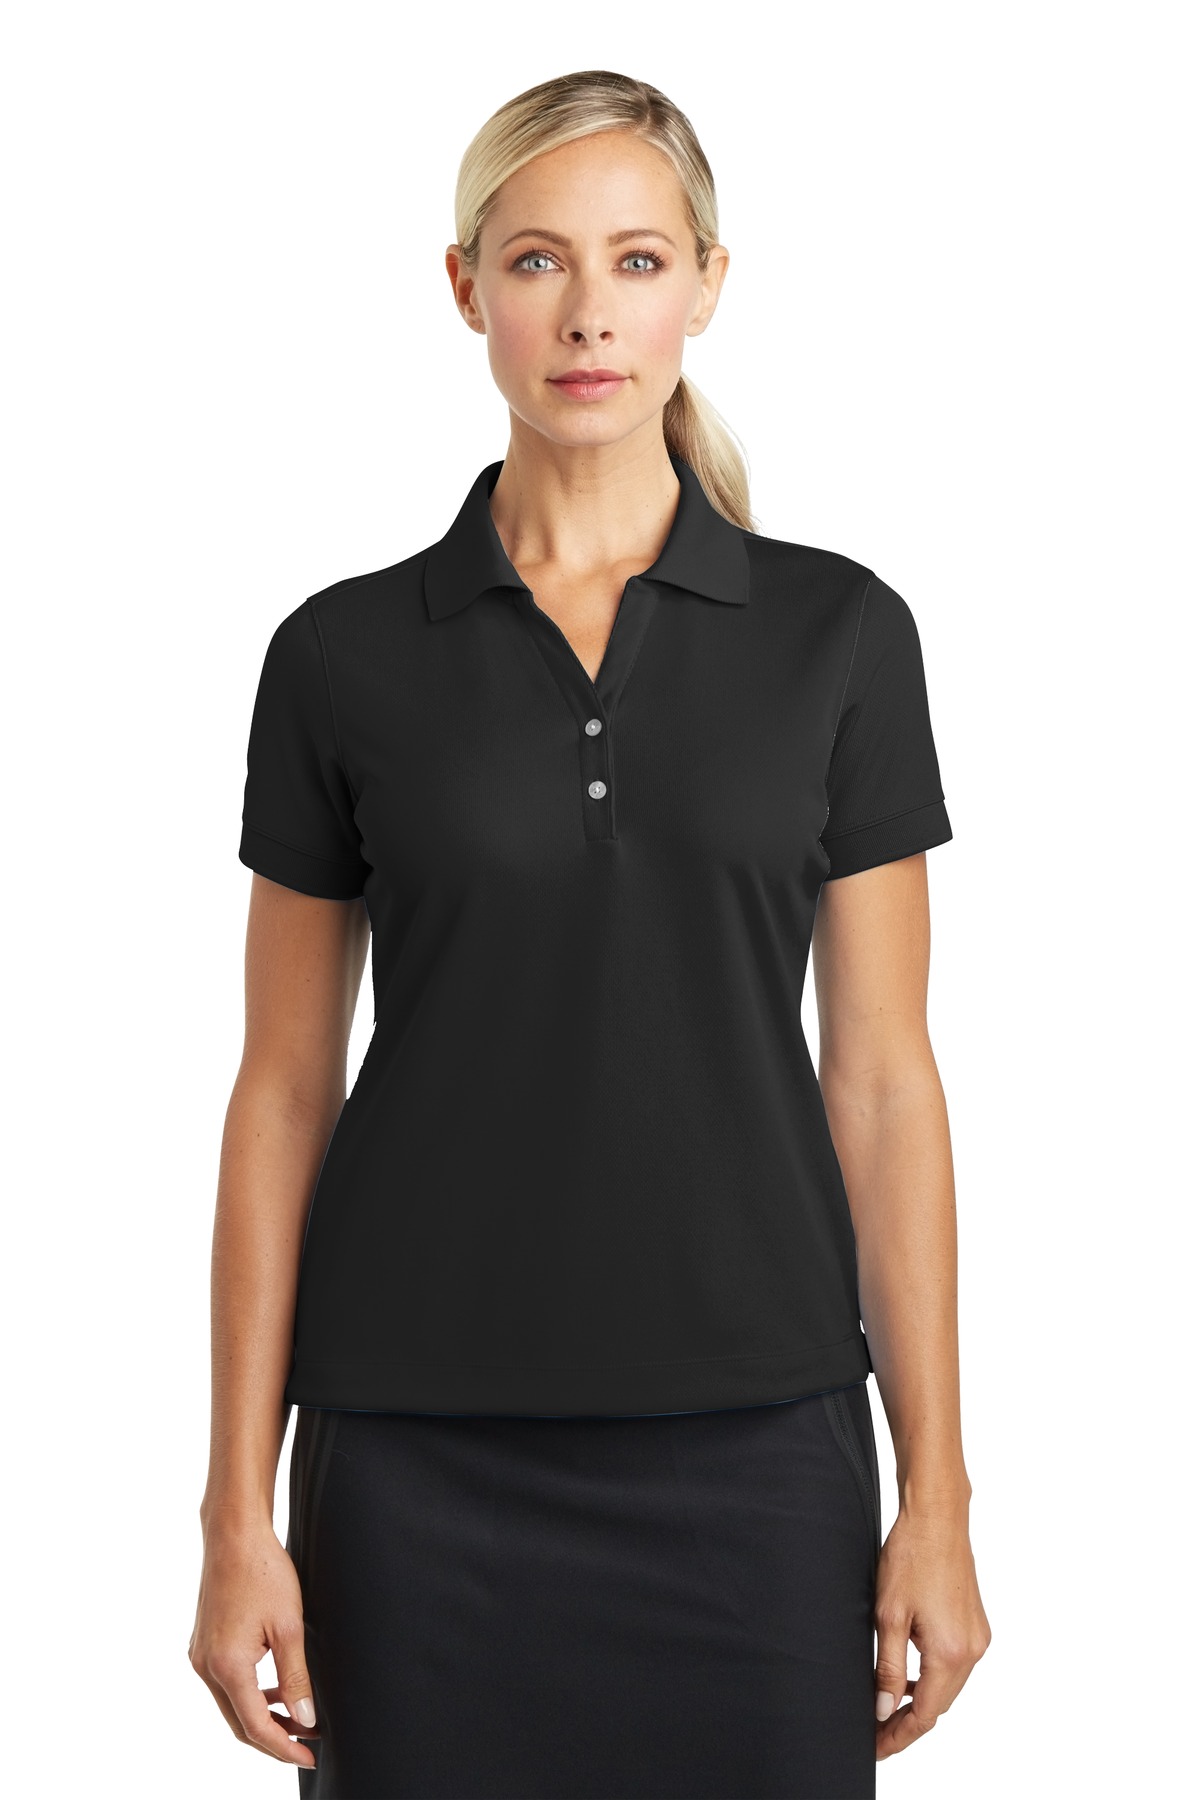 Nike Ladies Dri-FIT Classic Polo.-Promotional